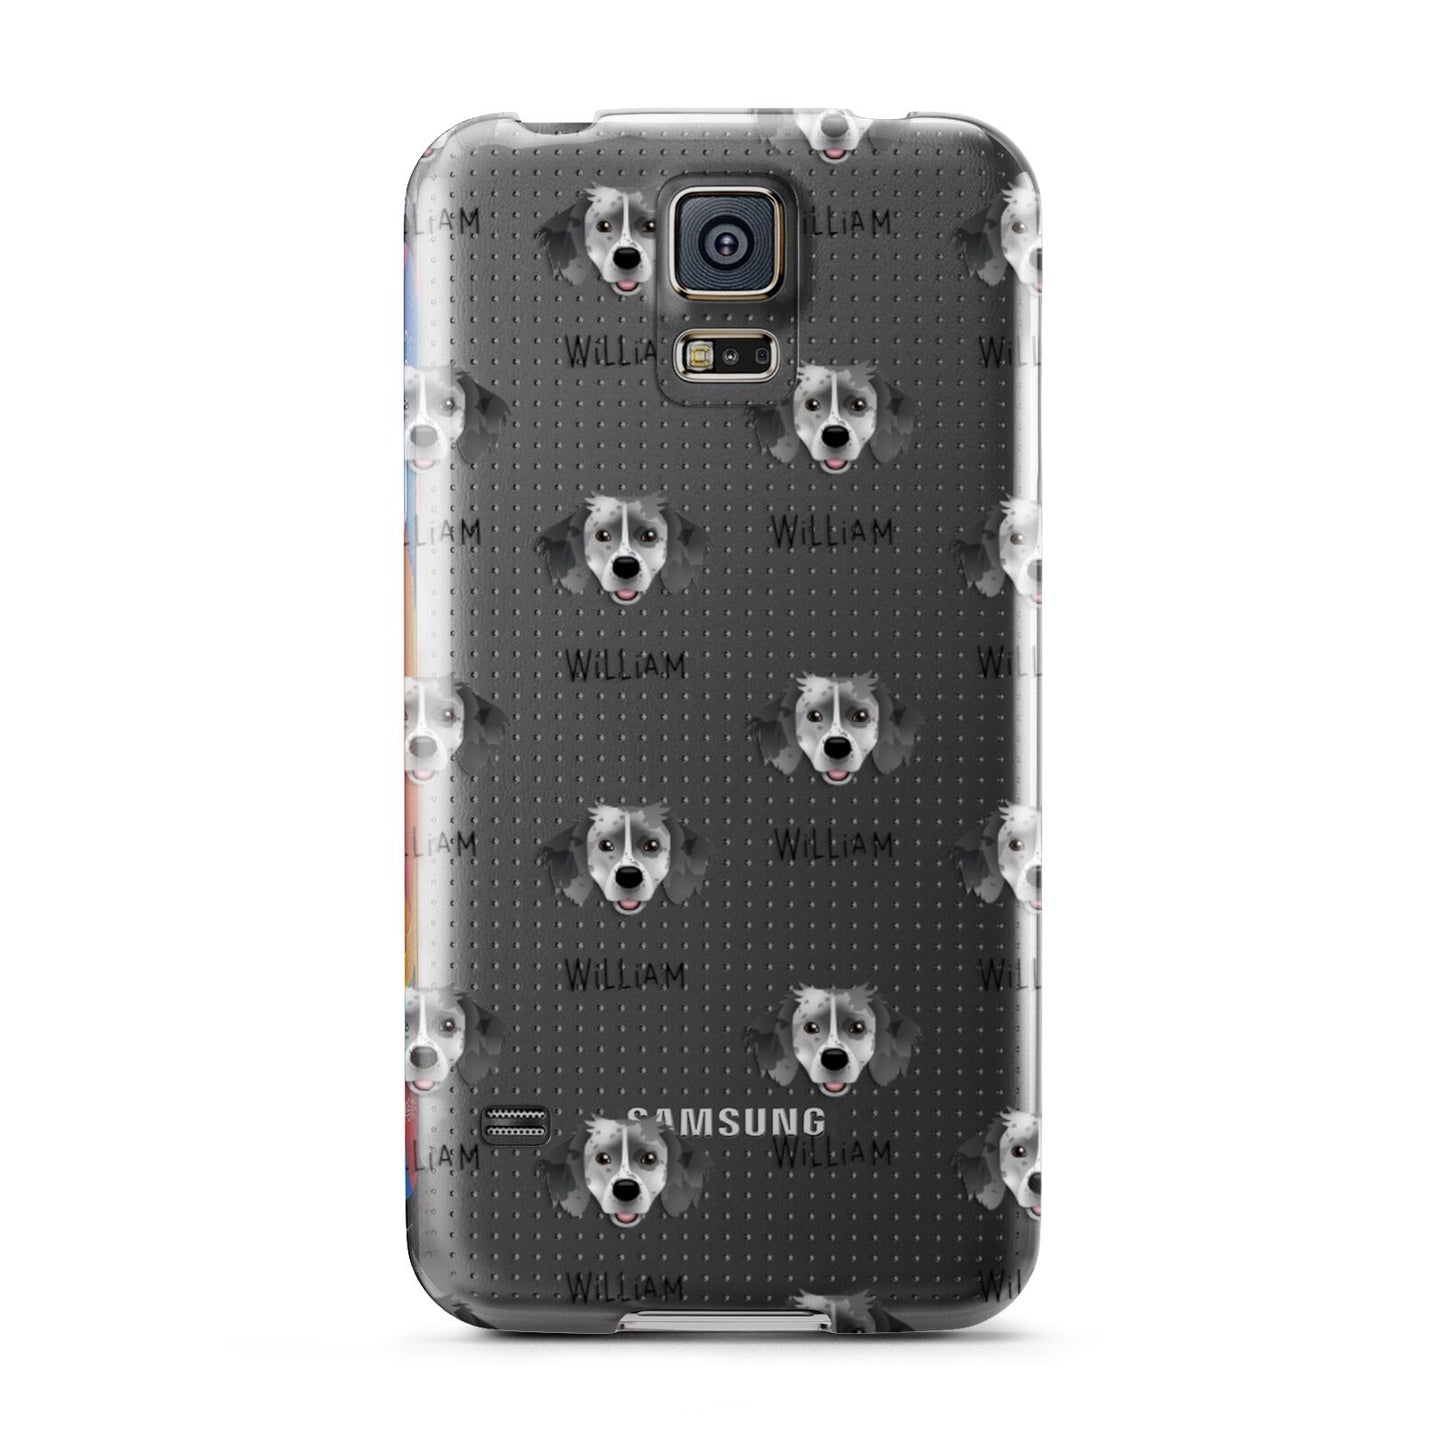 Sprollie Icon with Name Samsung Galaxy S5 Case